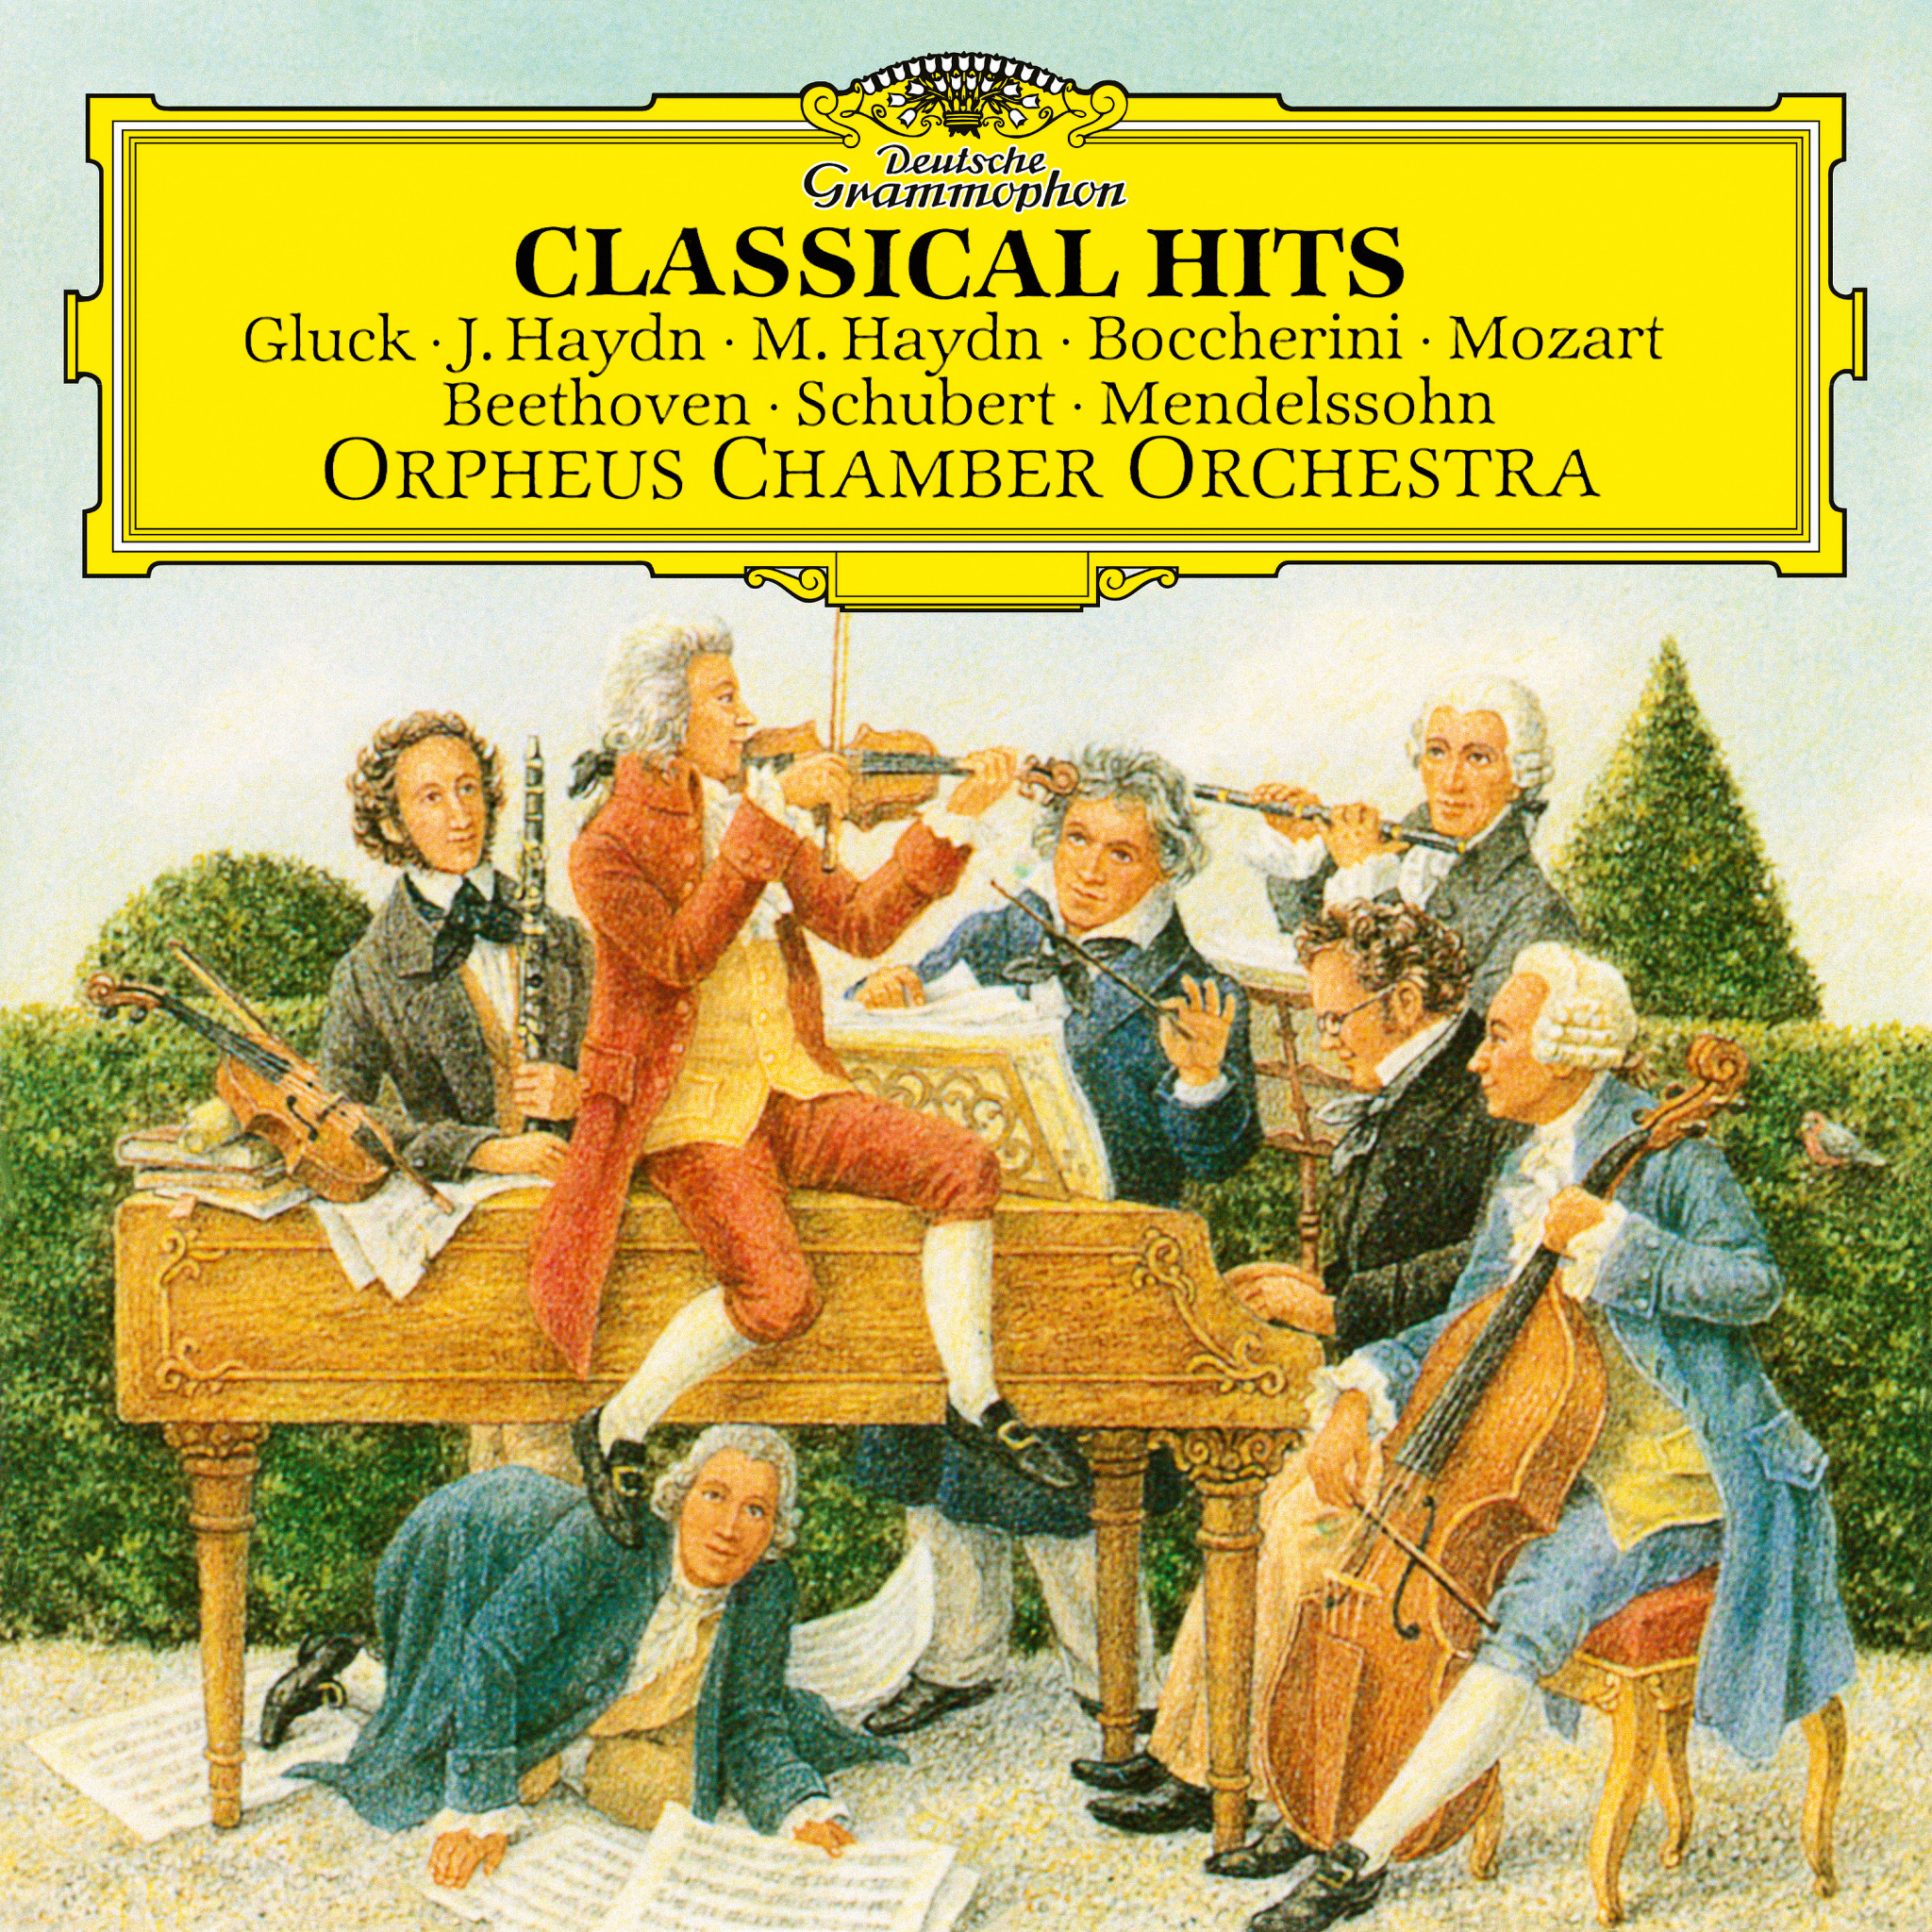 Orpheus Chamber Orchestra - Classical Hits eAlbum Cover